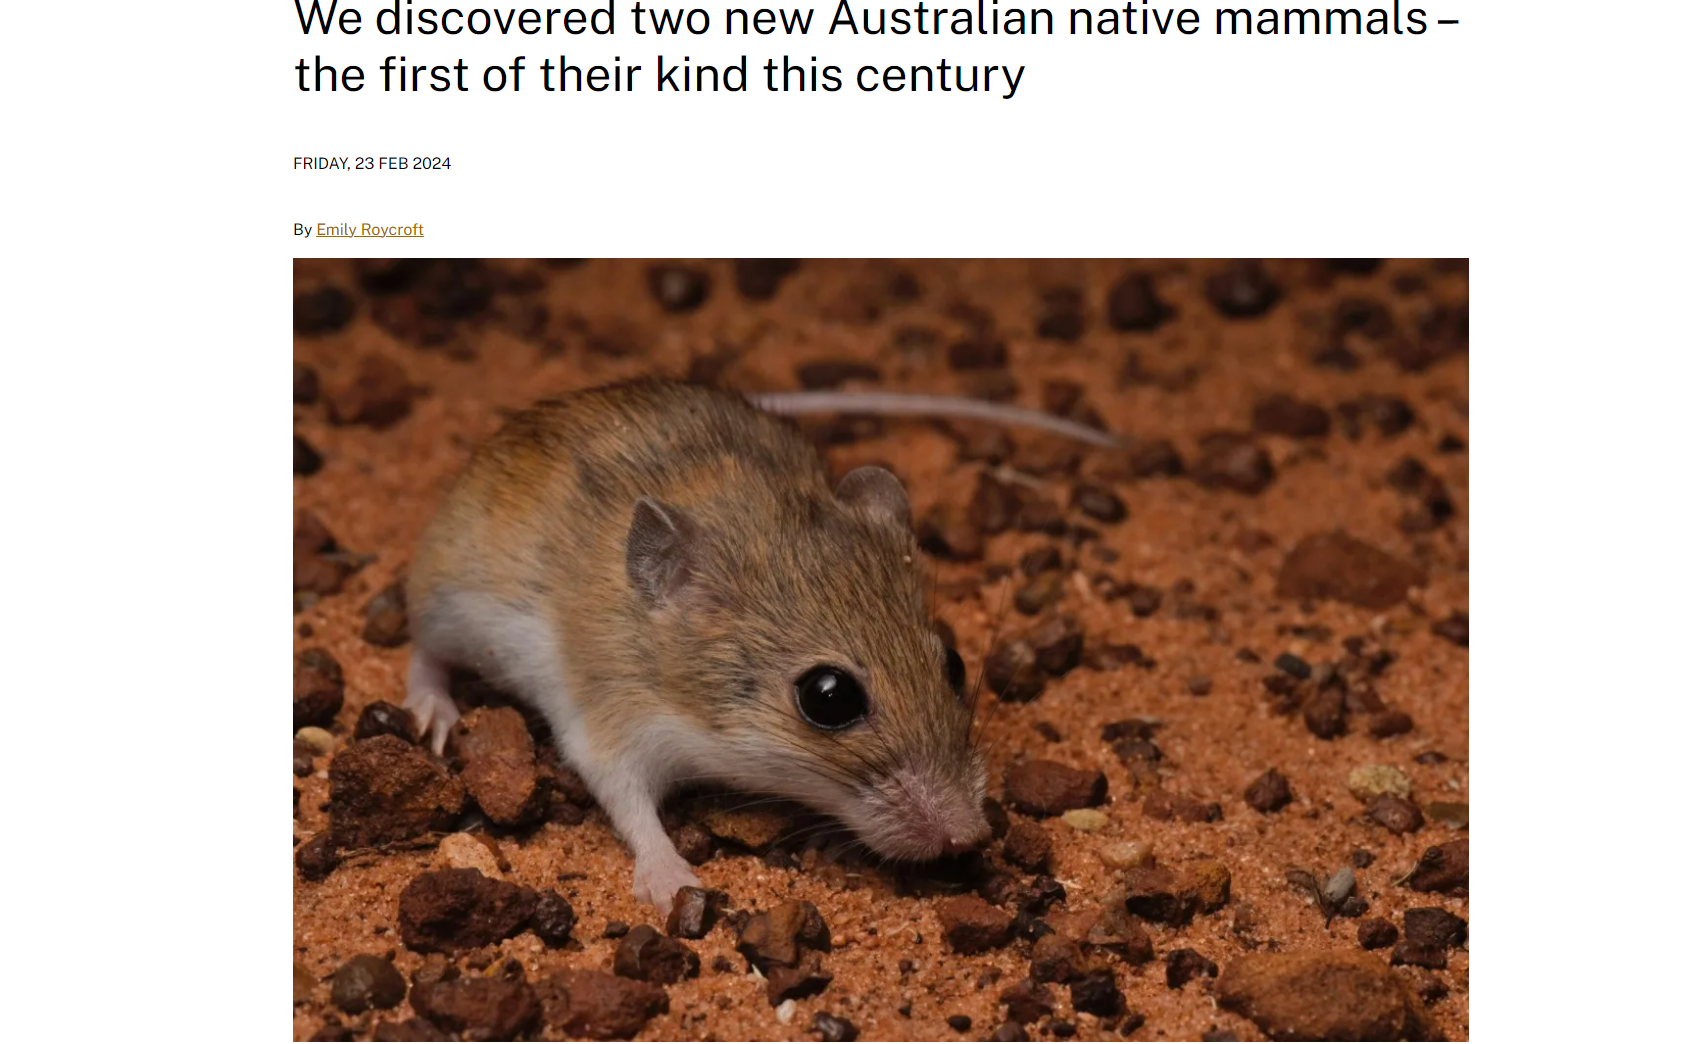 A screenshot of the Australian National University's website shows the newly described western delicate mouse.